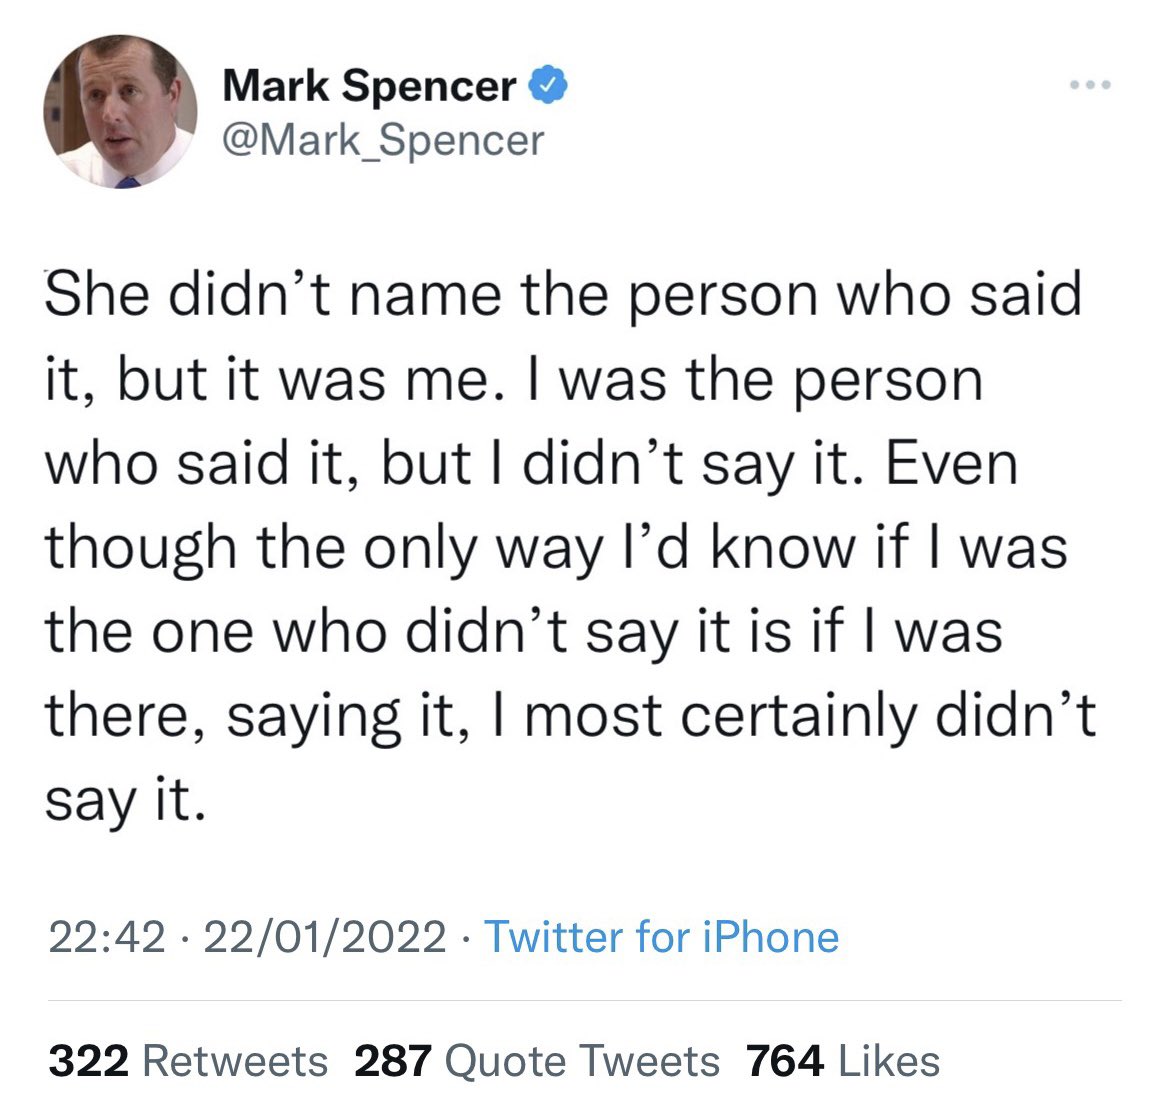 @Mark_Spencer I’ve fixed that for you. You’re welcome.